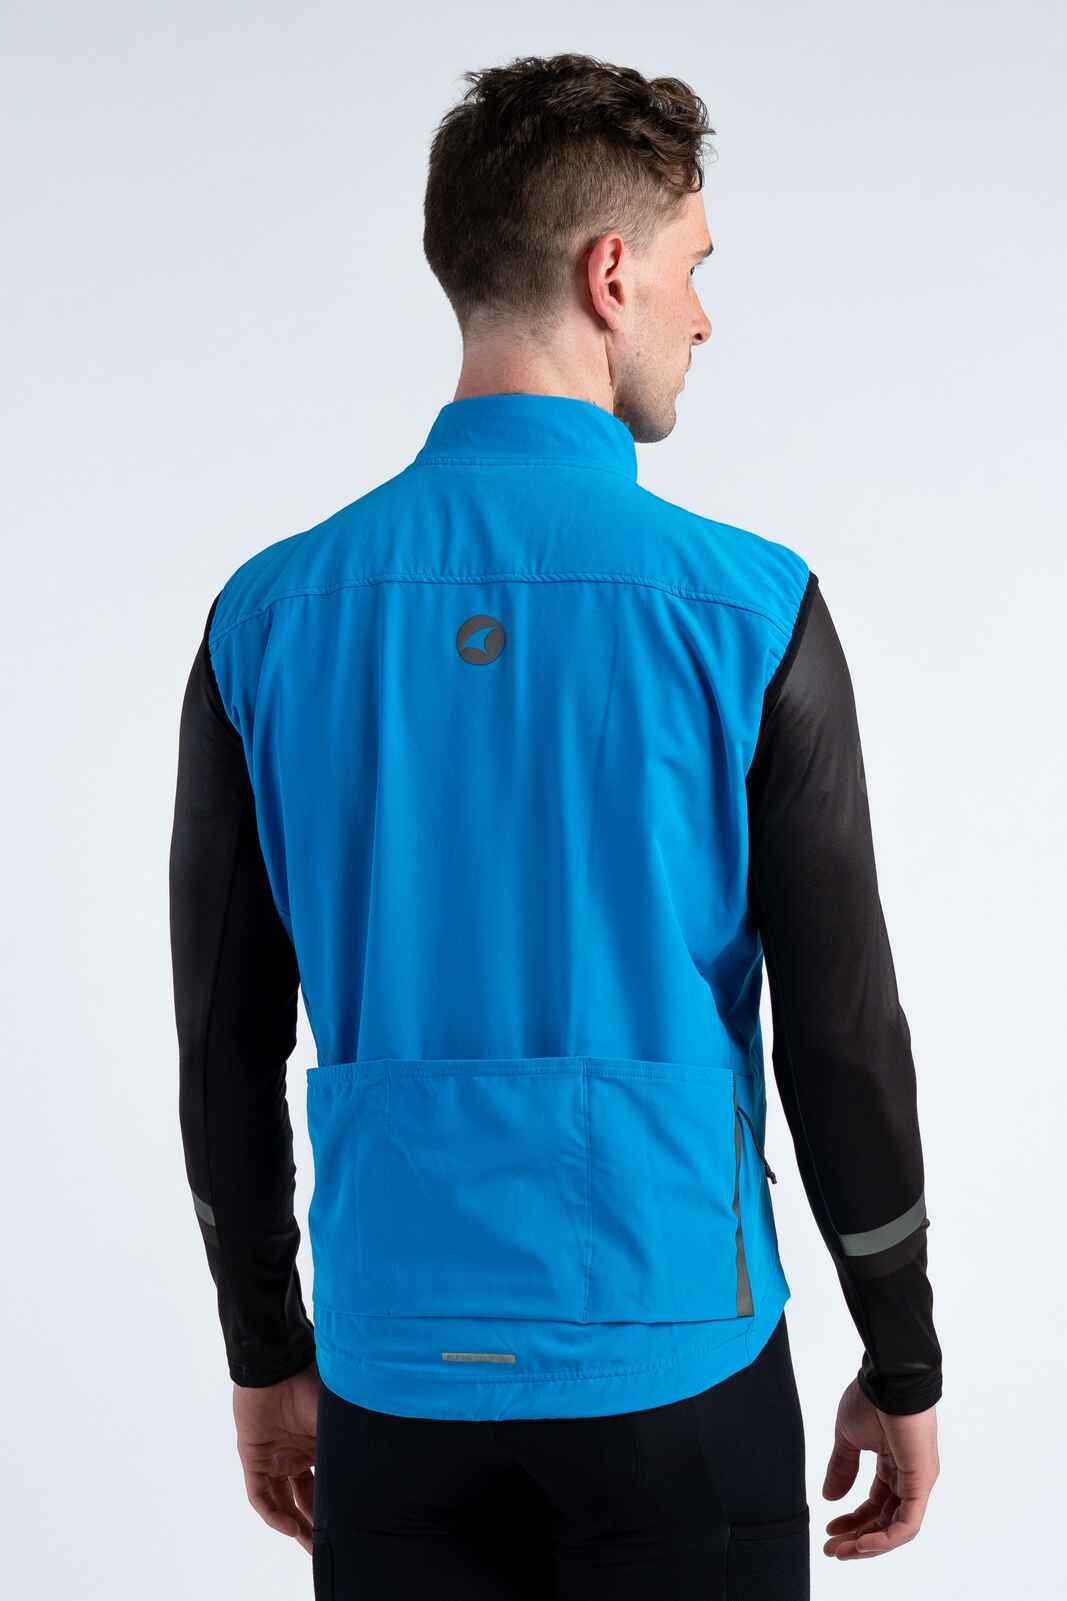 Men's Blue Thermal Cycling Vest - Back View